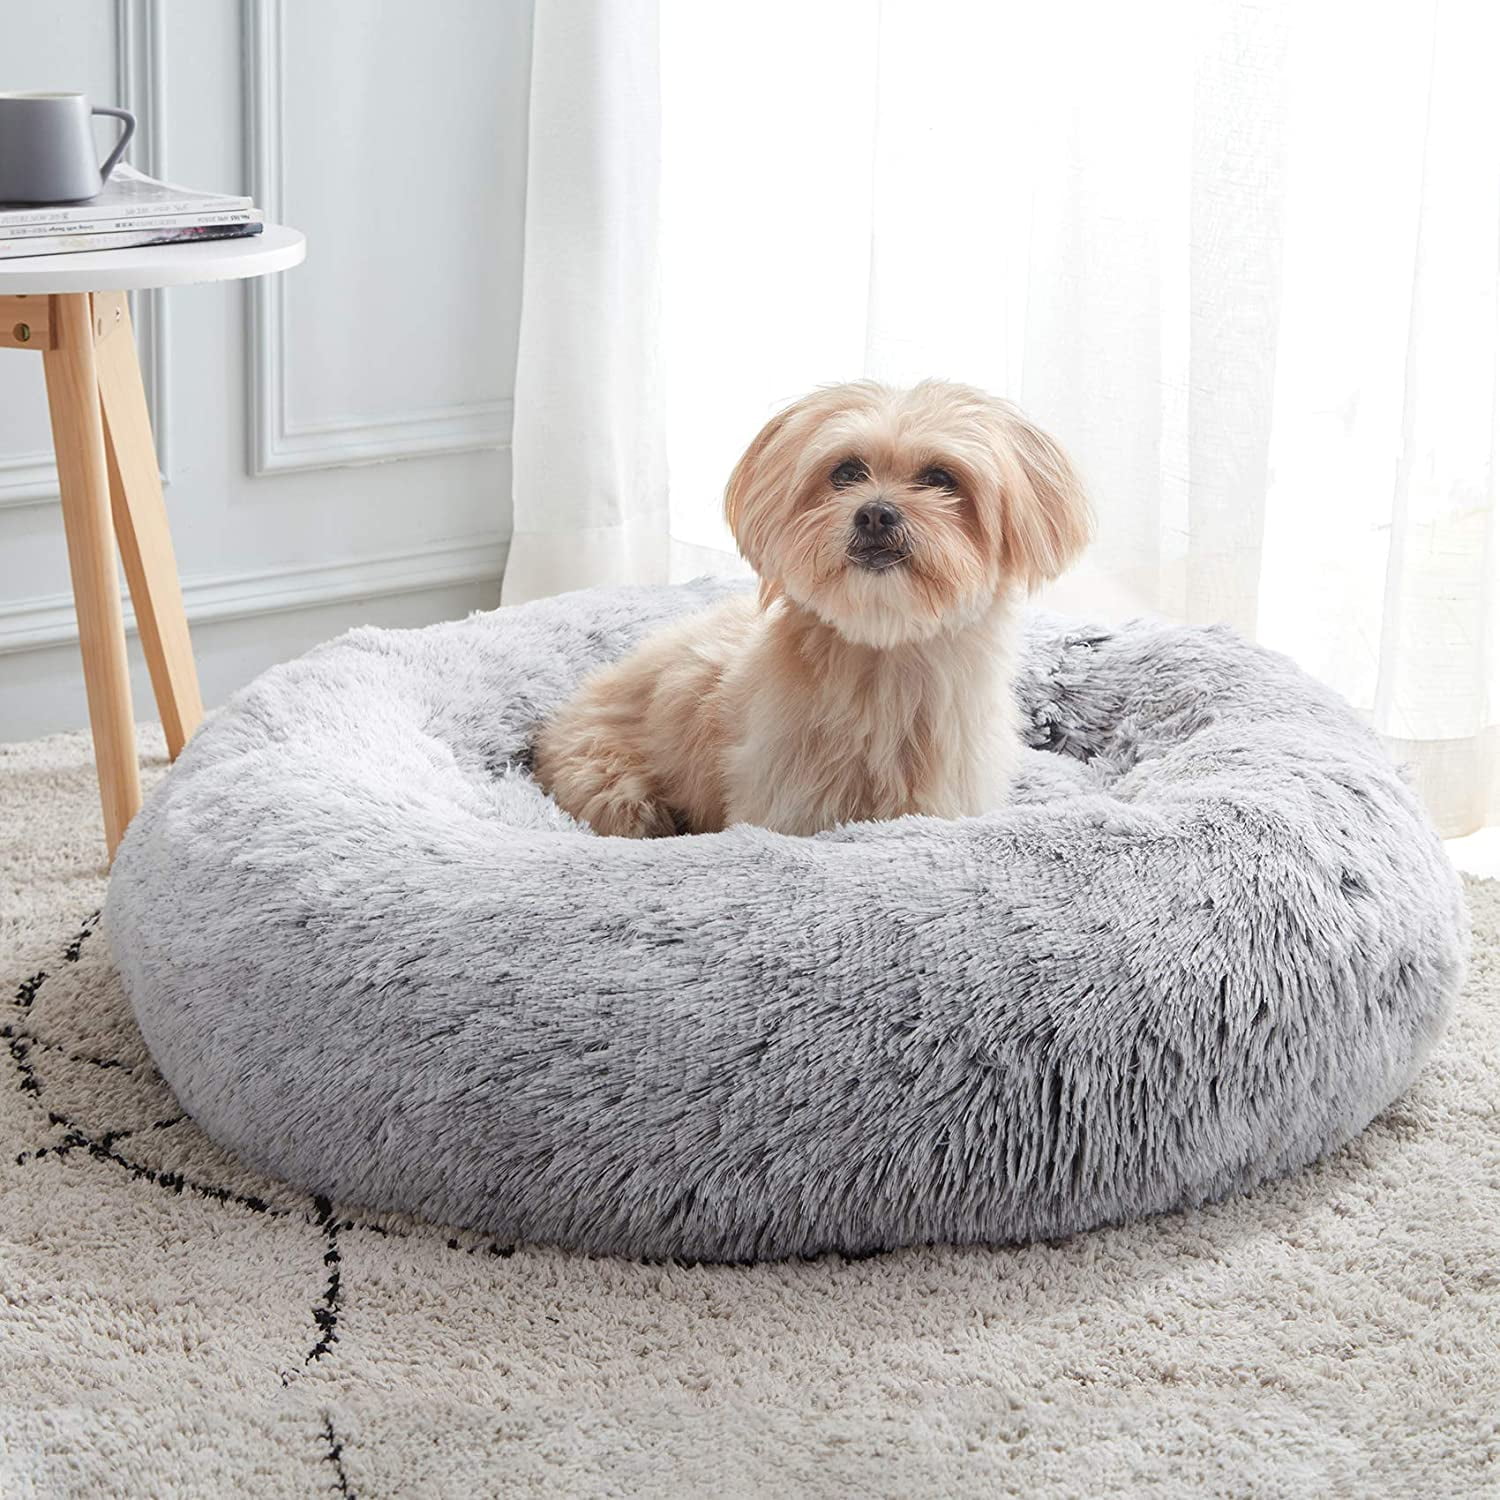 Fluffy and Cozy Pet Cushion for Small Medium Pet Improved Sleep Machine Washable 27.6 Anti-Anxiety Round Donut Dog Bed Beige Anti-Slip Bottom UMINEUX Calming Dog Bed Cat Bed 